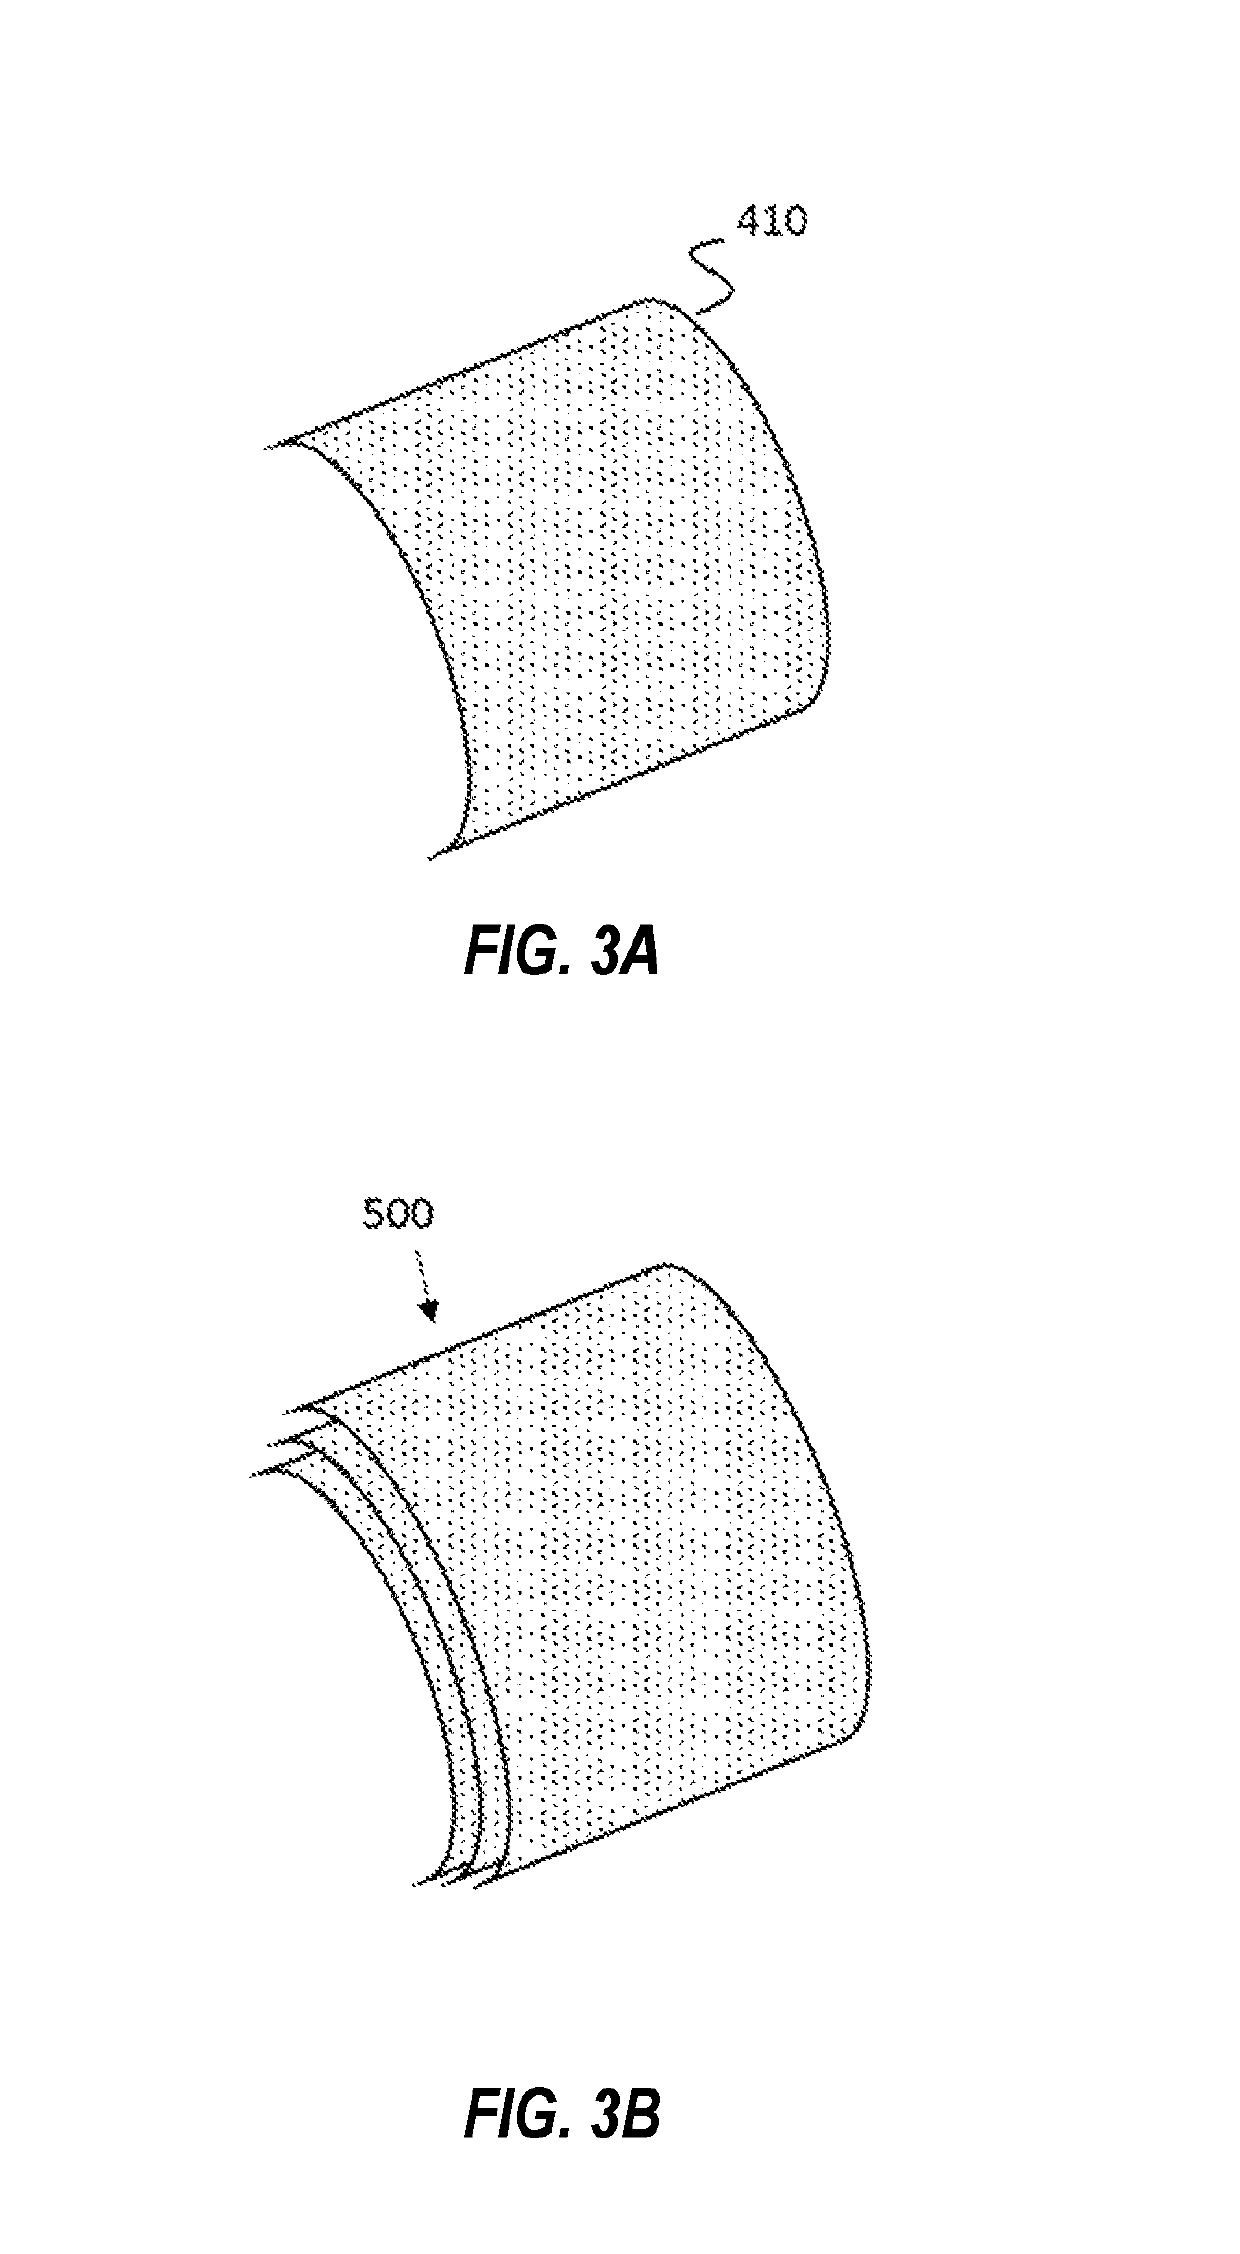 Fabrication and operation of multi-function flexible radiation detection systems